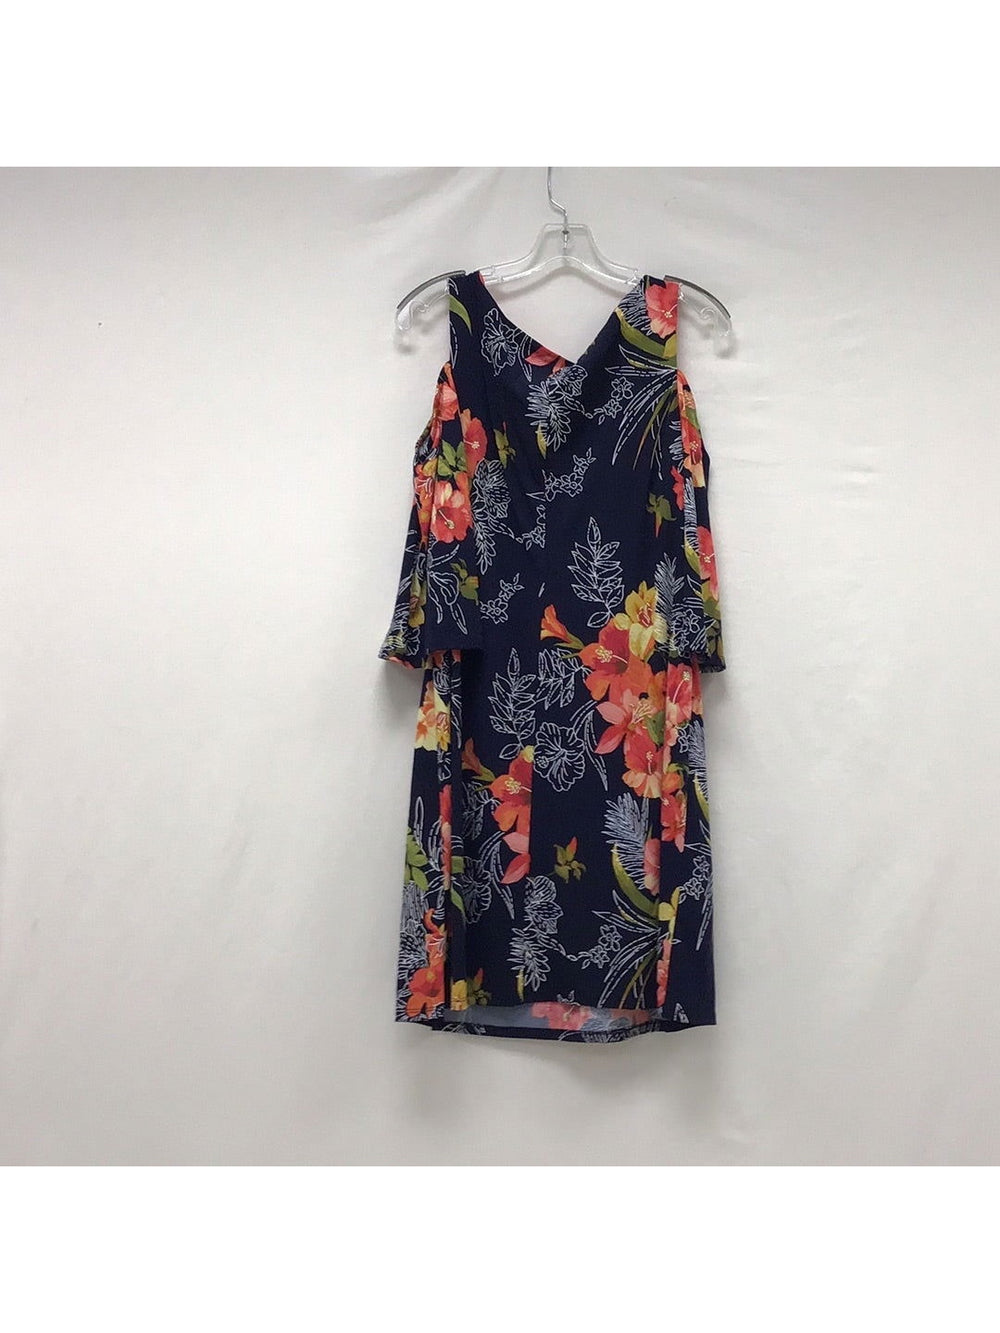 CONNECTED Women's dress - The Kennedy Collective Thrift - 